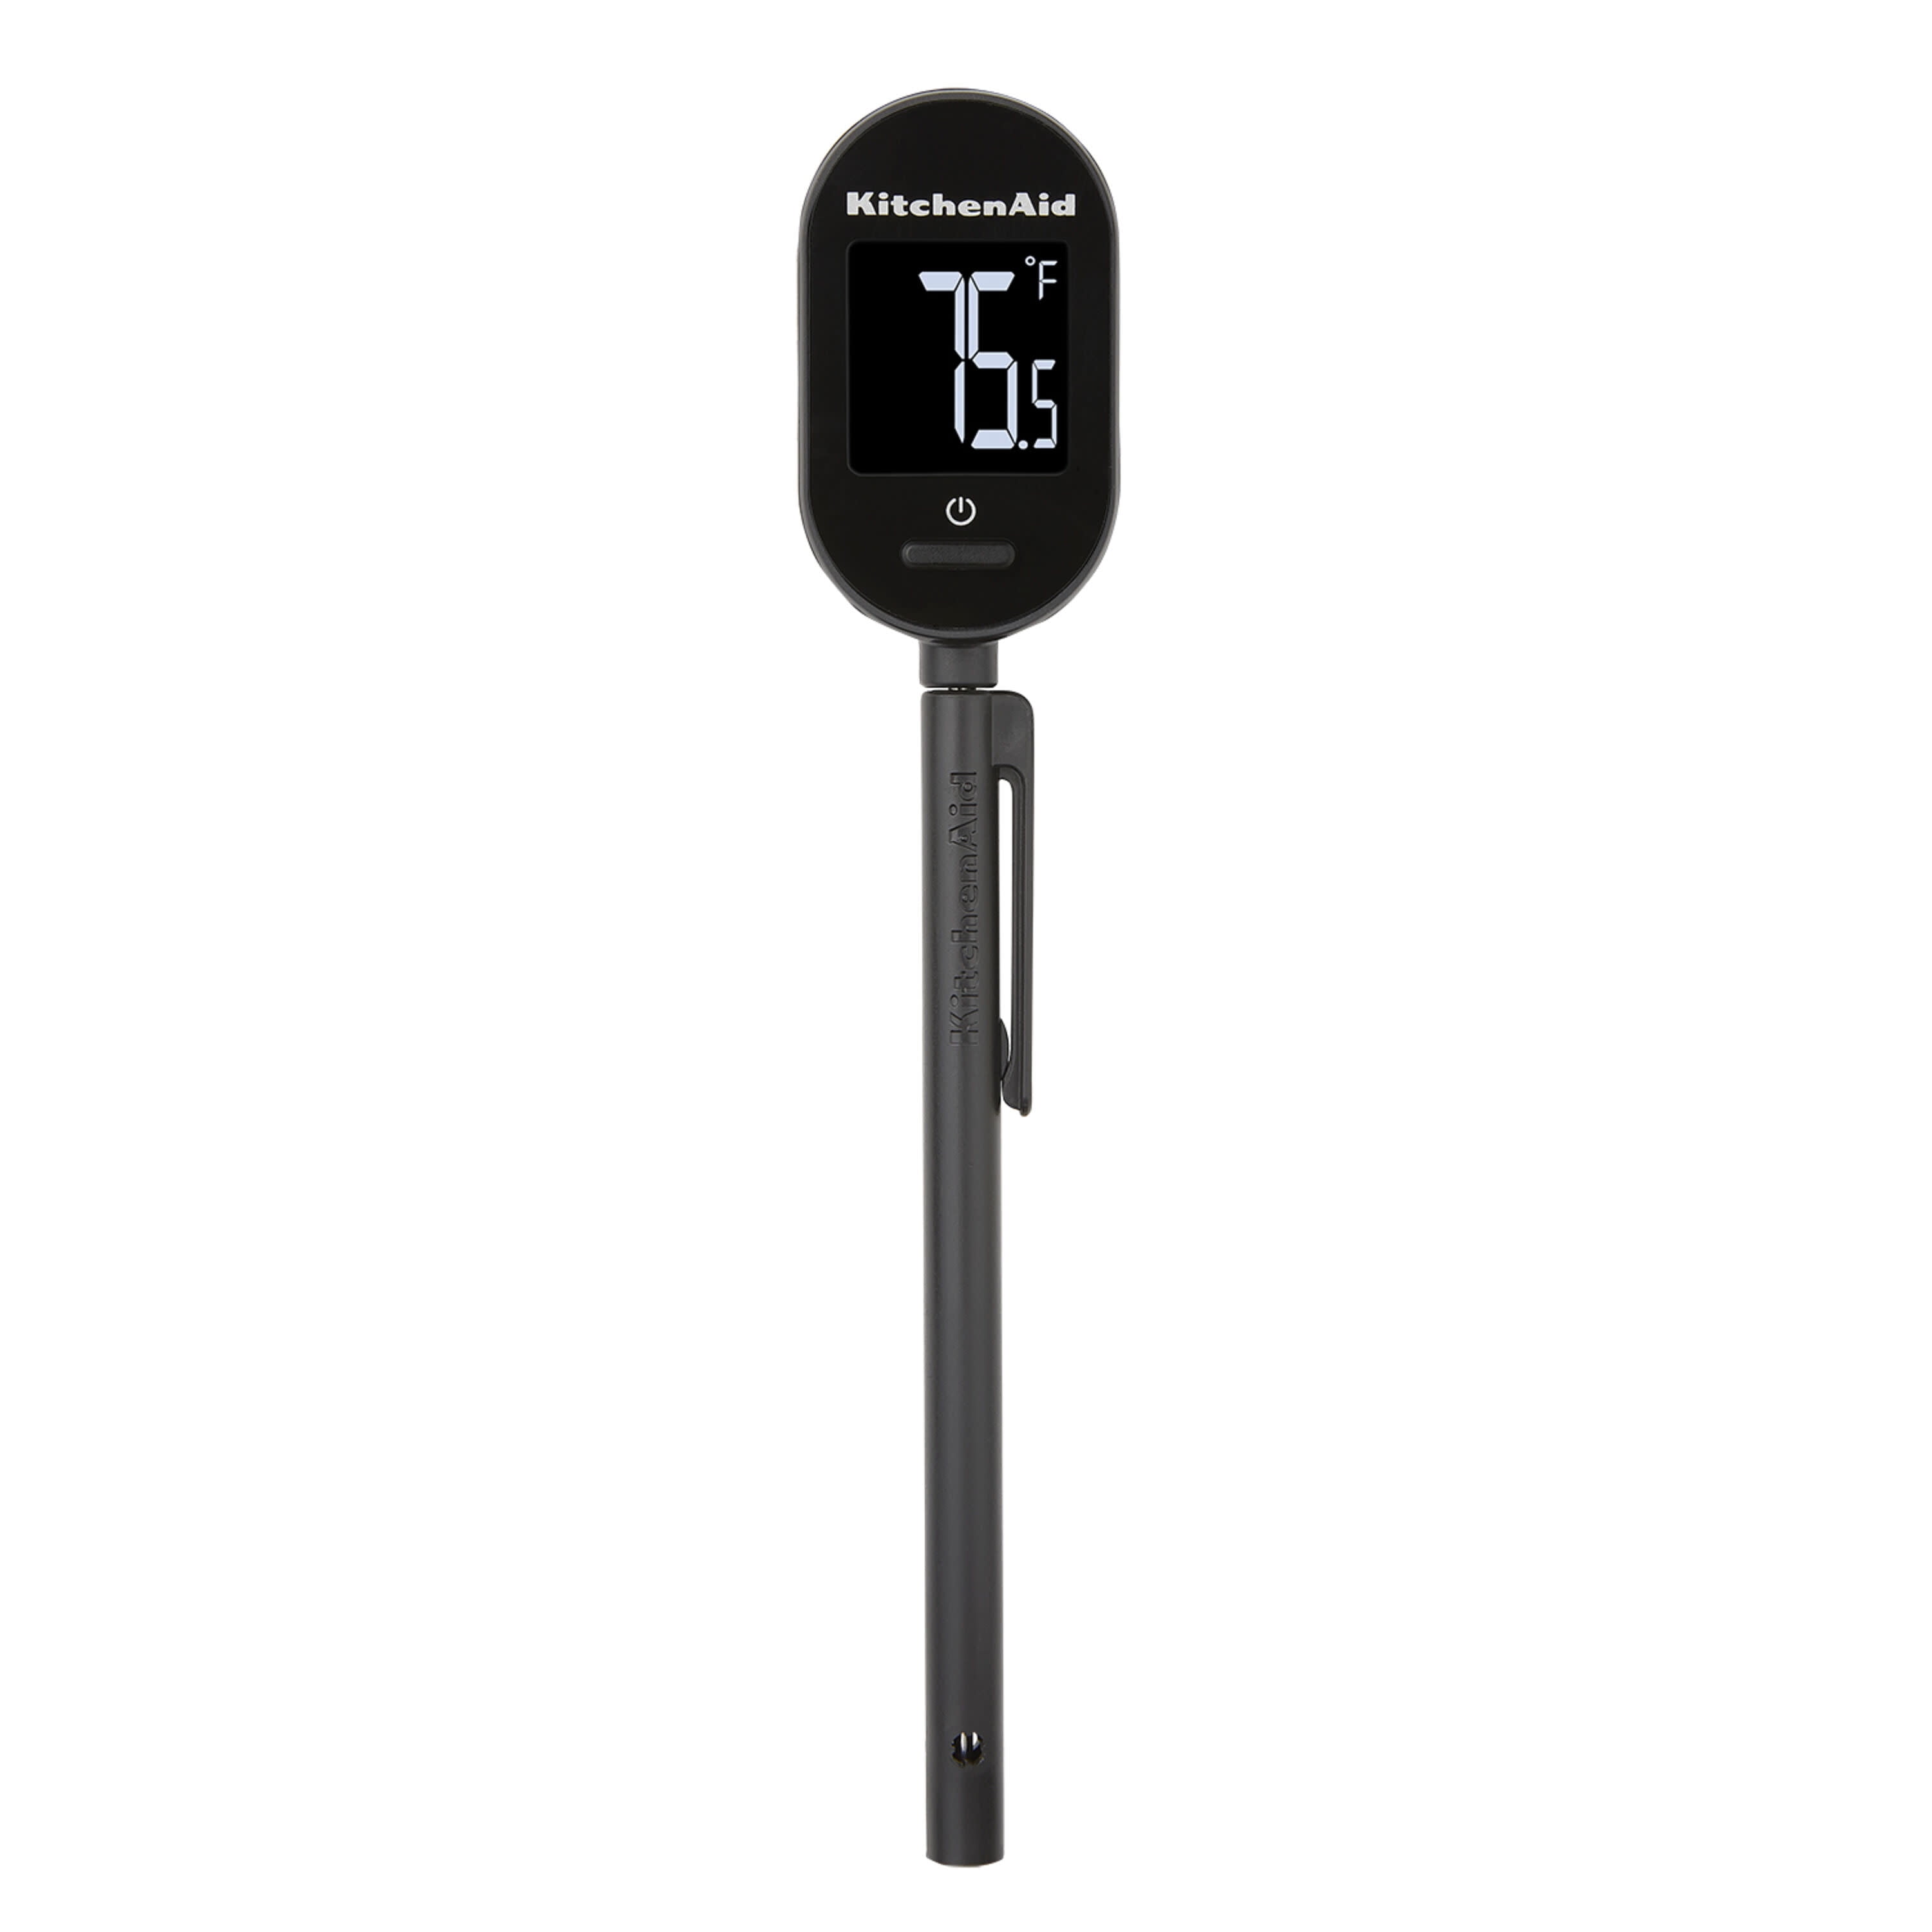  KitchenAid KQ907 Curved Stainless Steel Paddle Style Candy and  Deep Fry Thermometer with pan clip, TEMPERATURE RANGE: 100F to 400F, Black:  Home & Kitchen